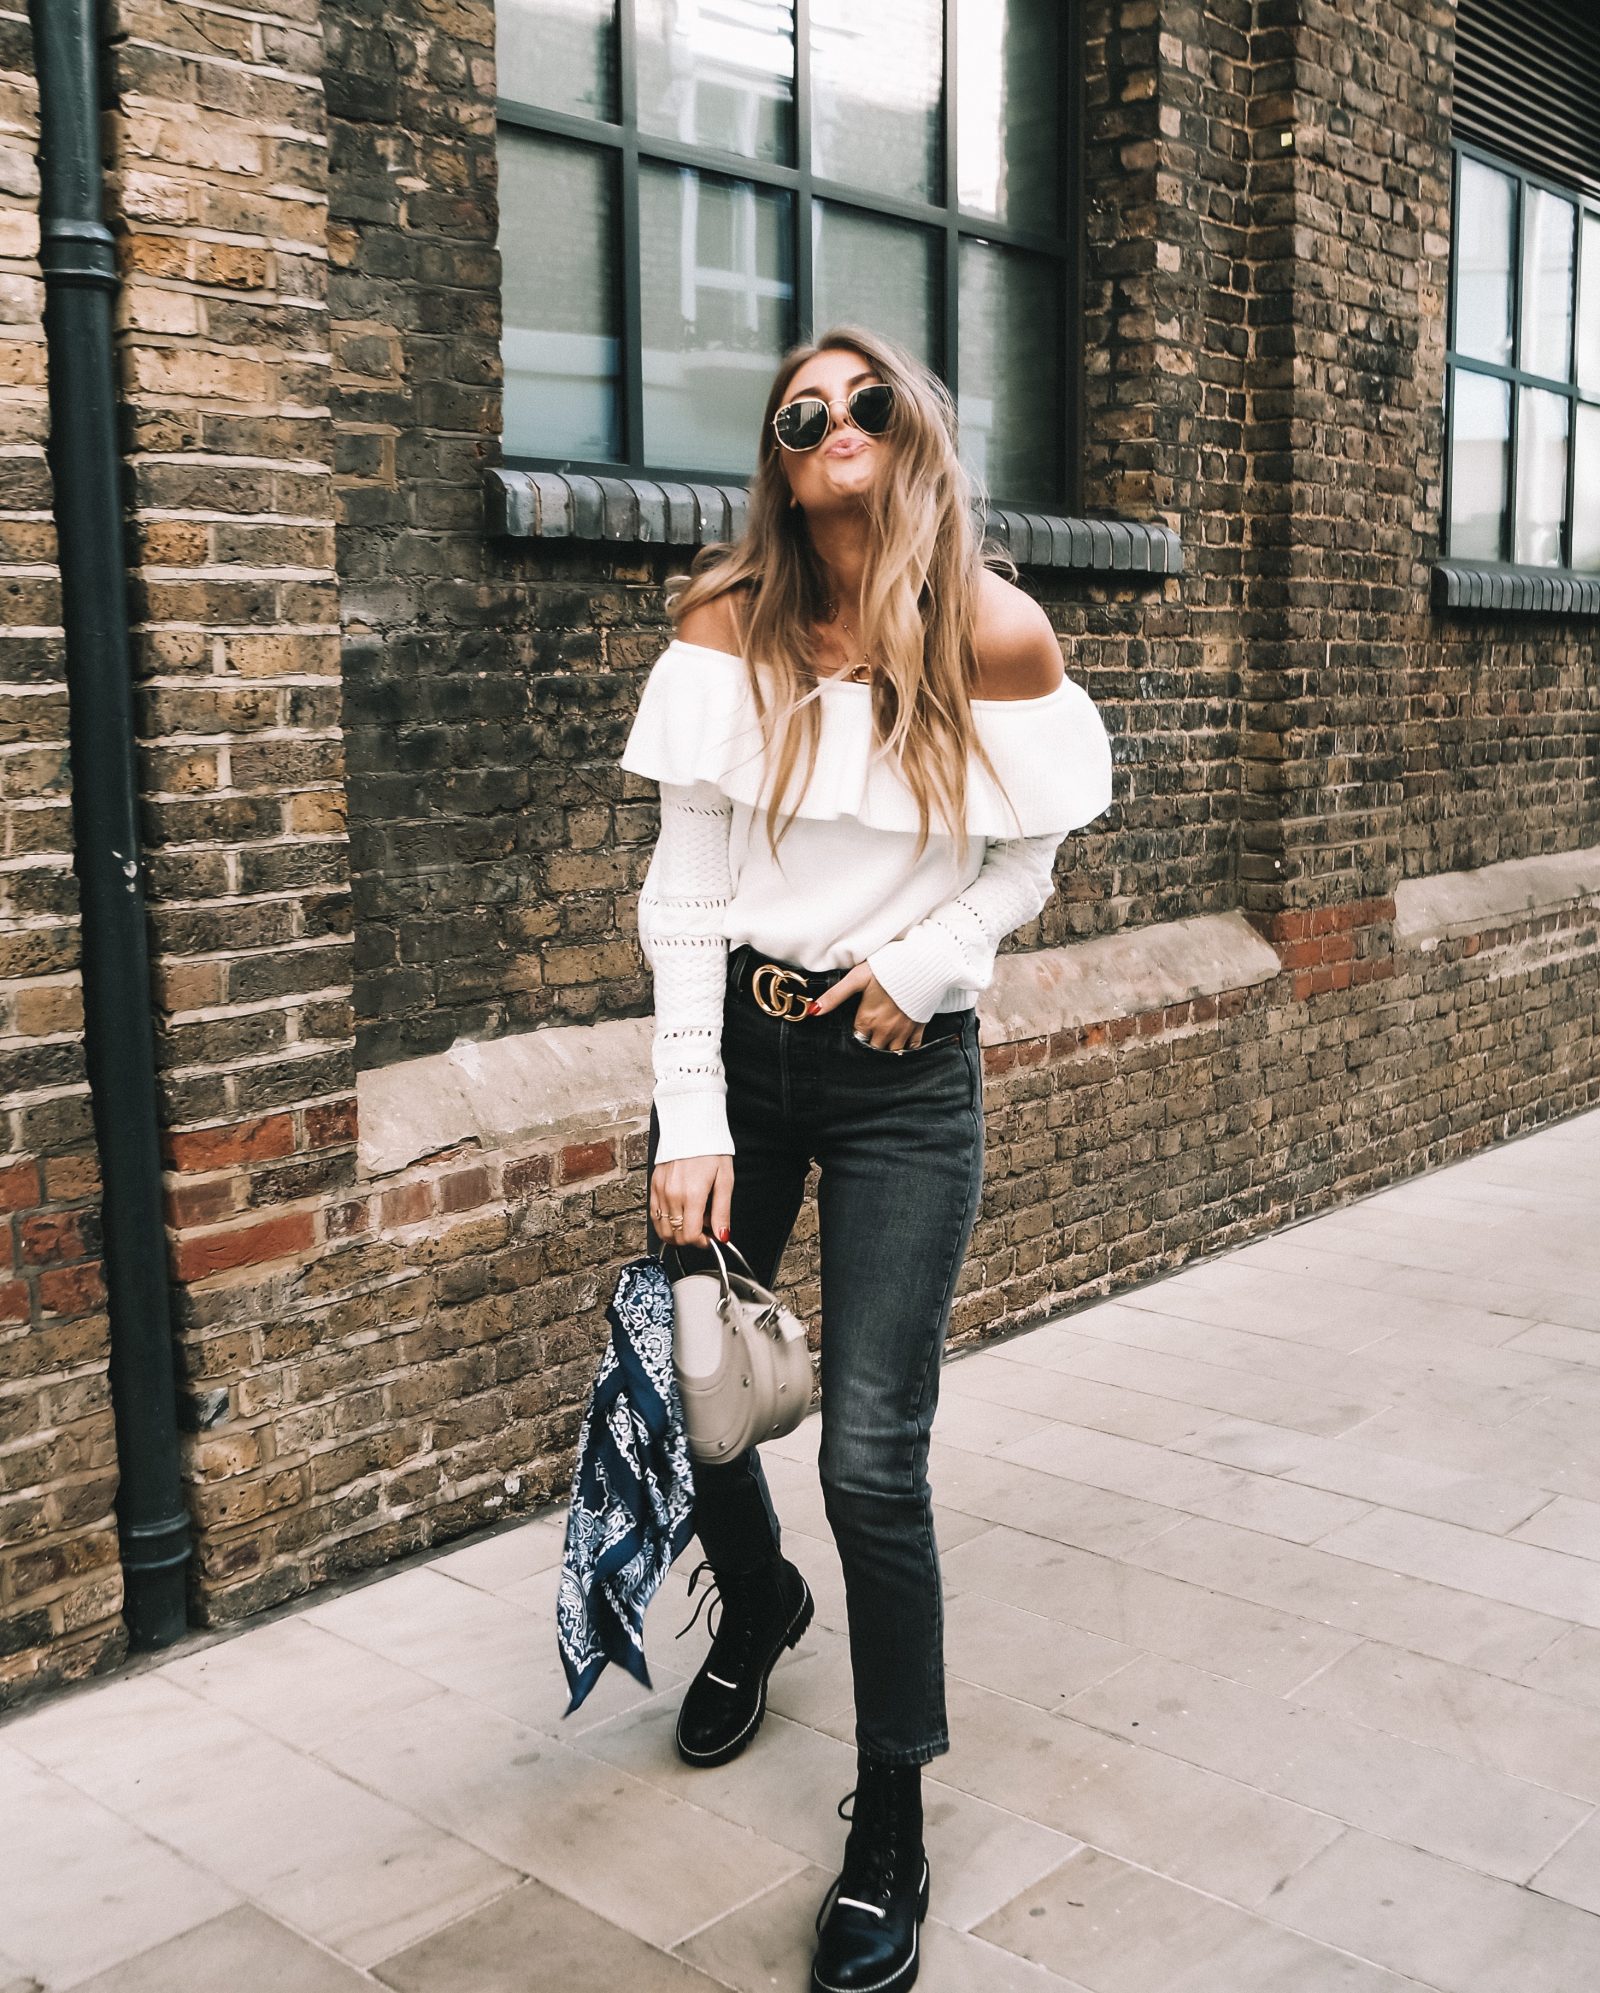 Moving To London - Lulus Outfit - Off Shoulder Knit - Sinead Crowe